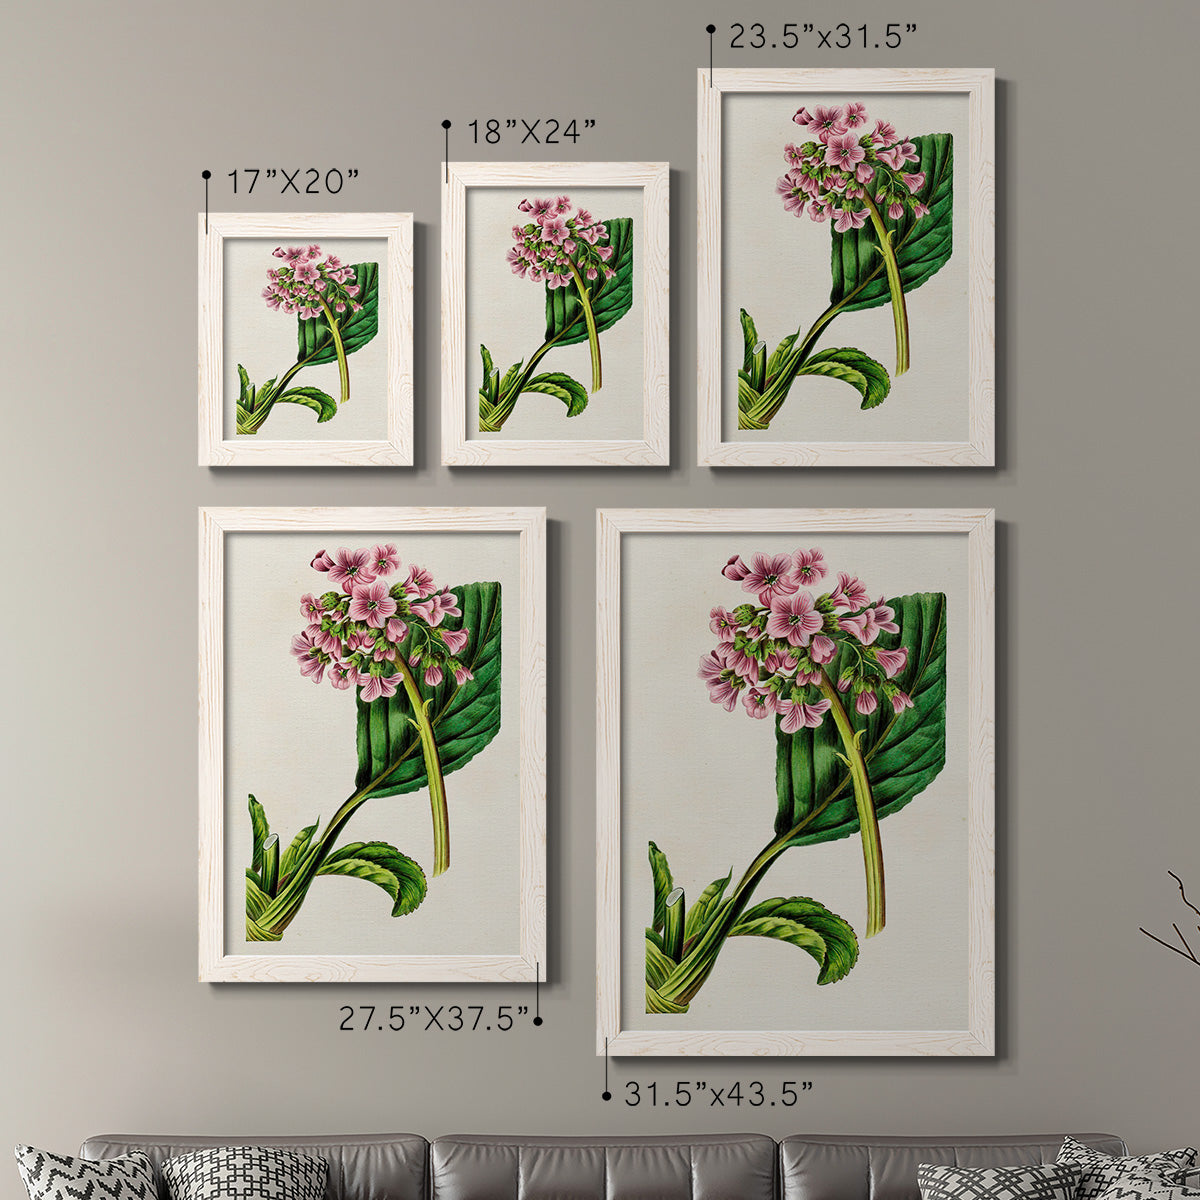 Antique Floral Folio III - Premium Framed Canvas 2 Piece Set - Ready to Hang